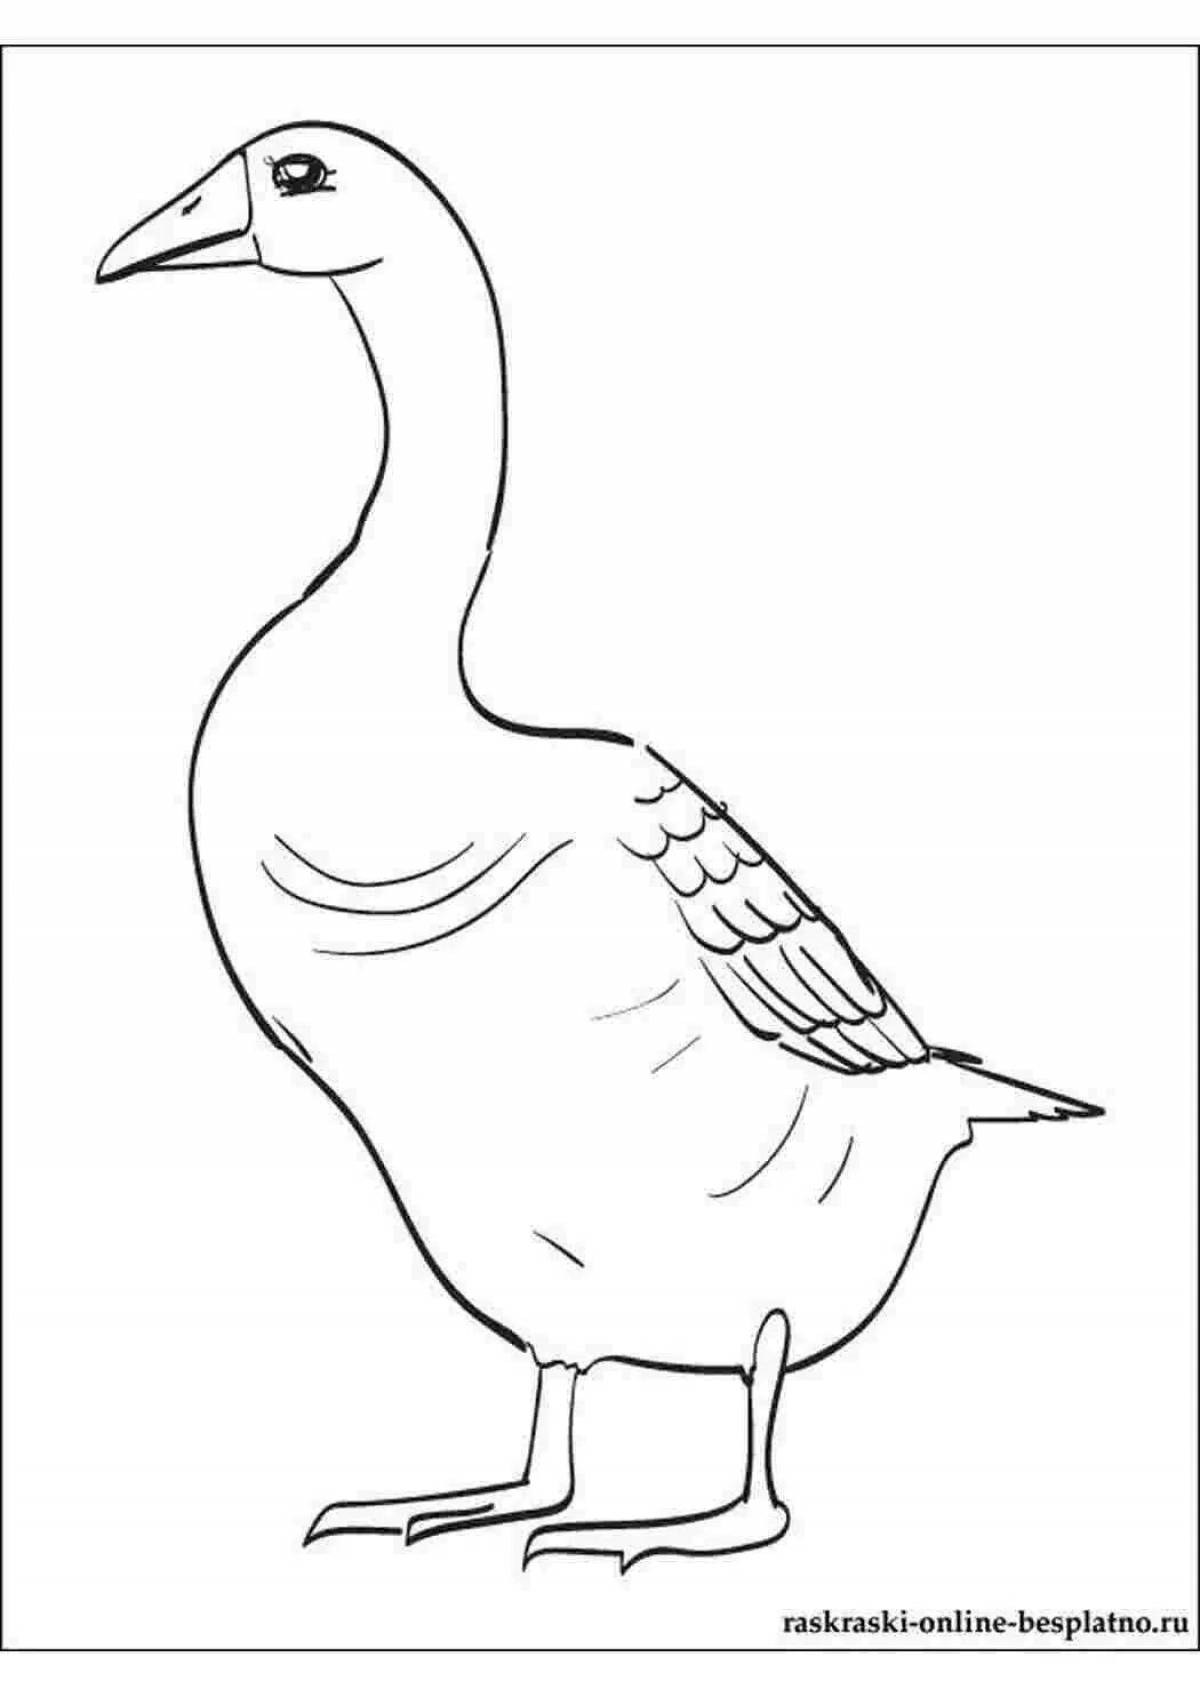 Adorable goose coloring book for kids